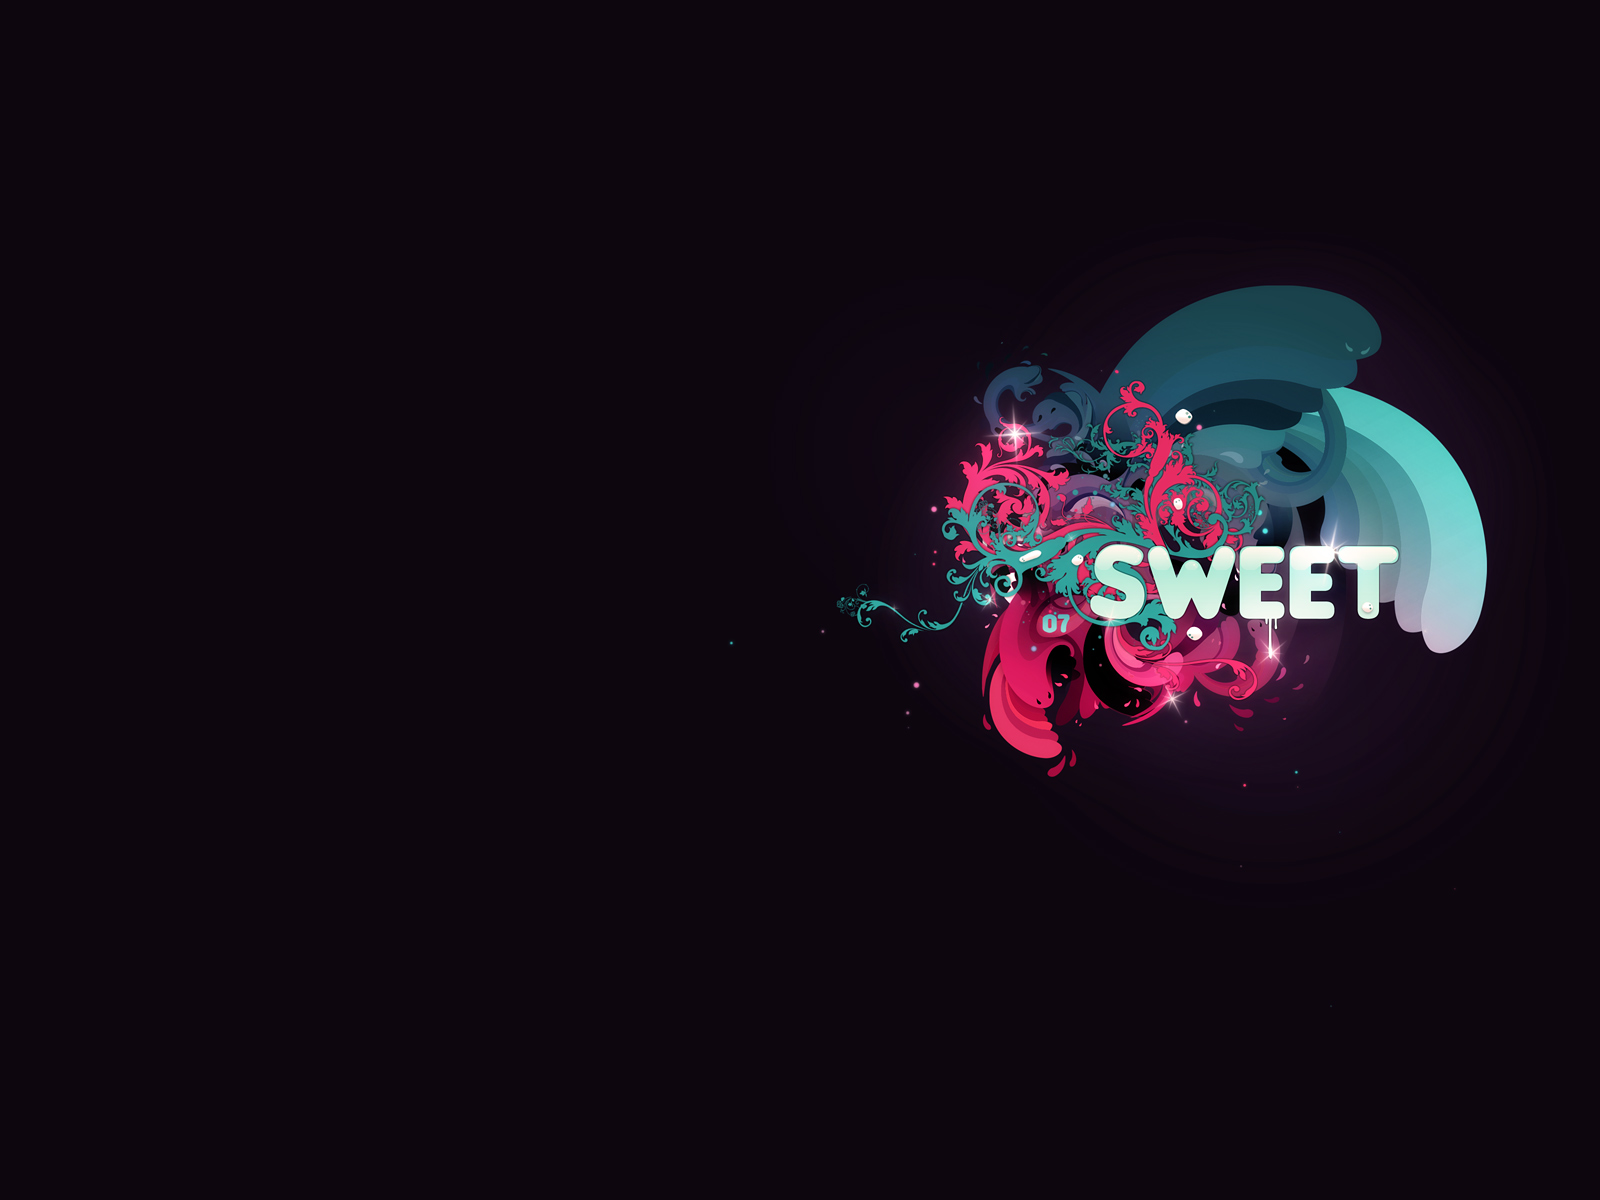 Download the Sweet Style Wallpaper, Sweet Style iPhone Wallpaper